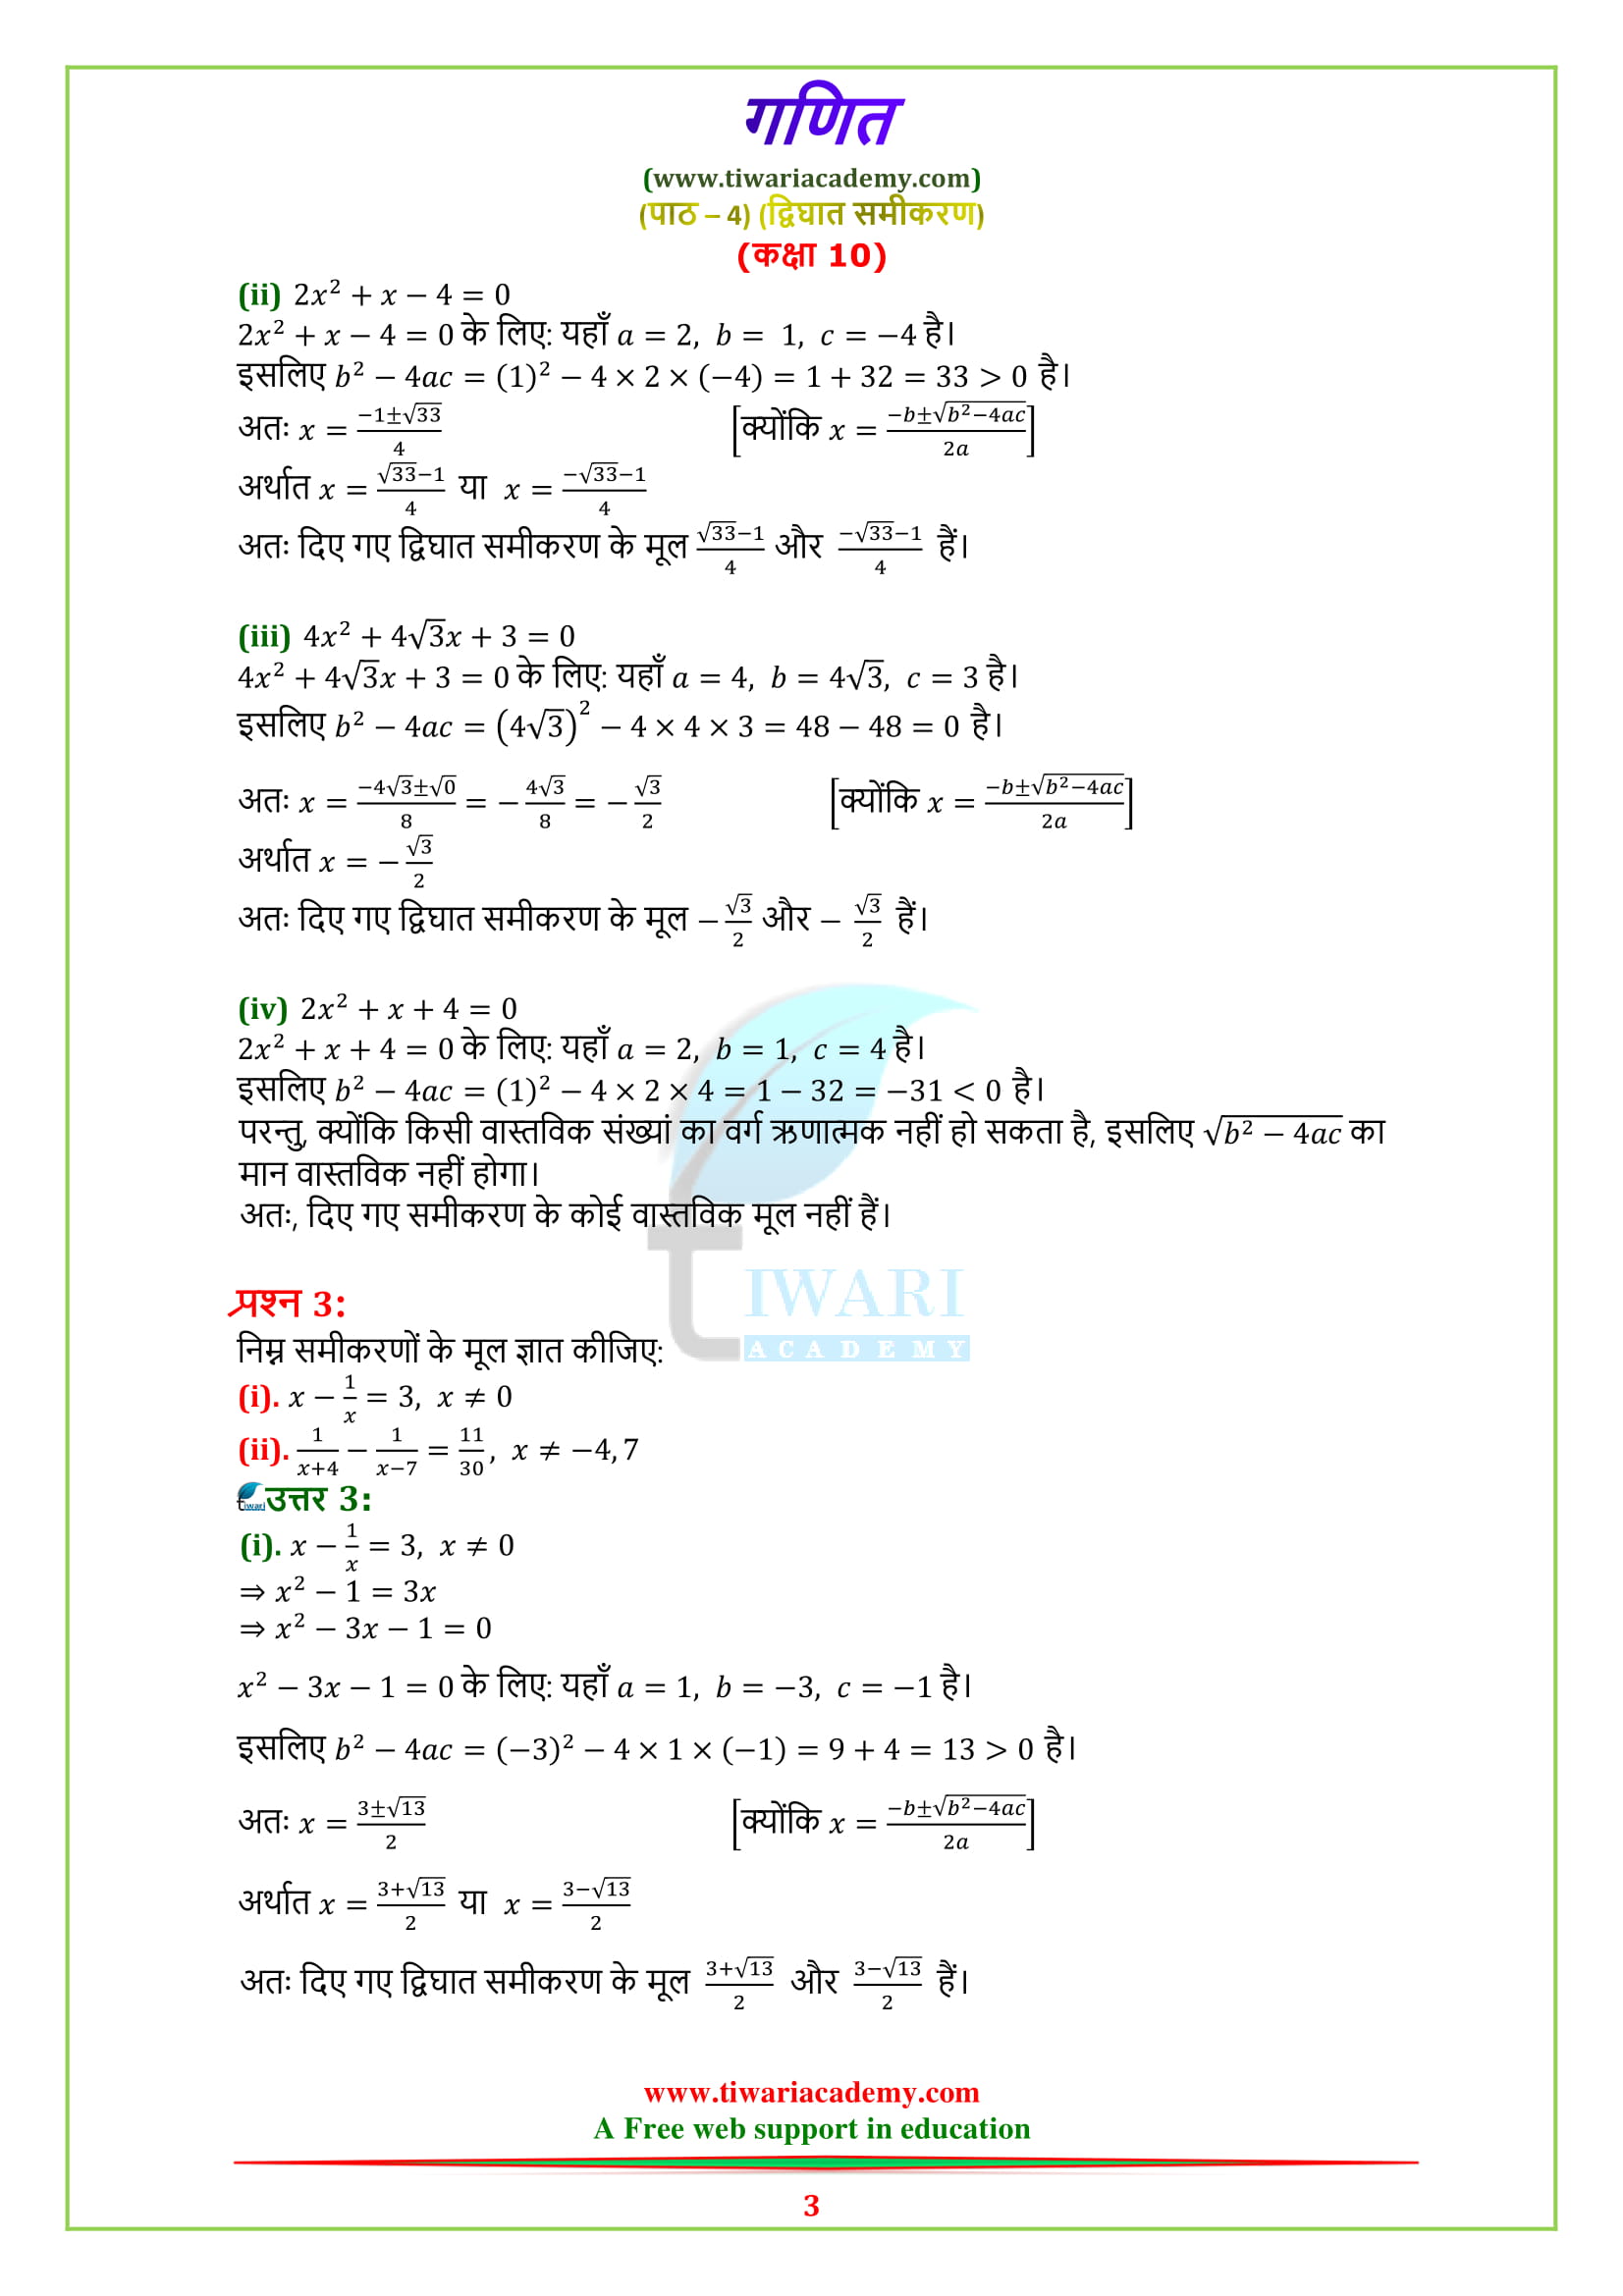 Class 10 Maths Chapter 4 Exercise 4.3 question 1, 2, 3, 4 in Hindi